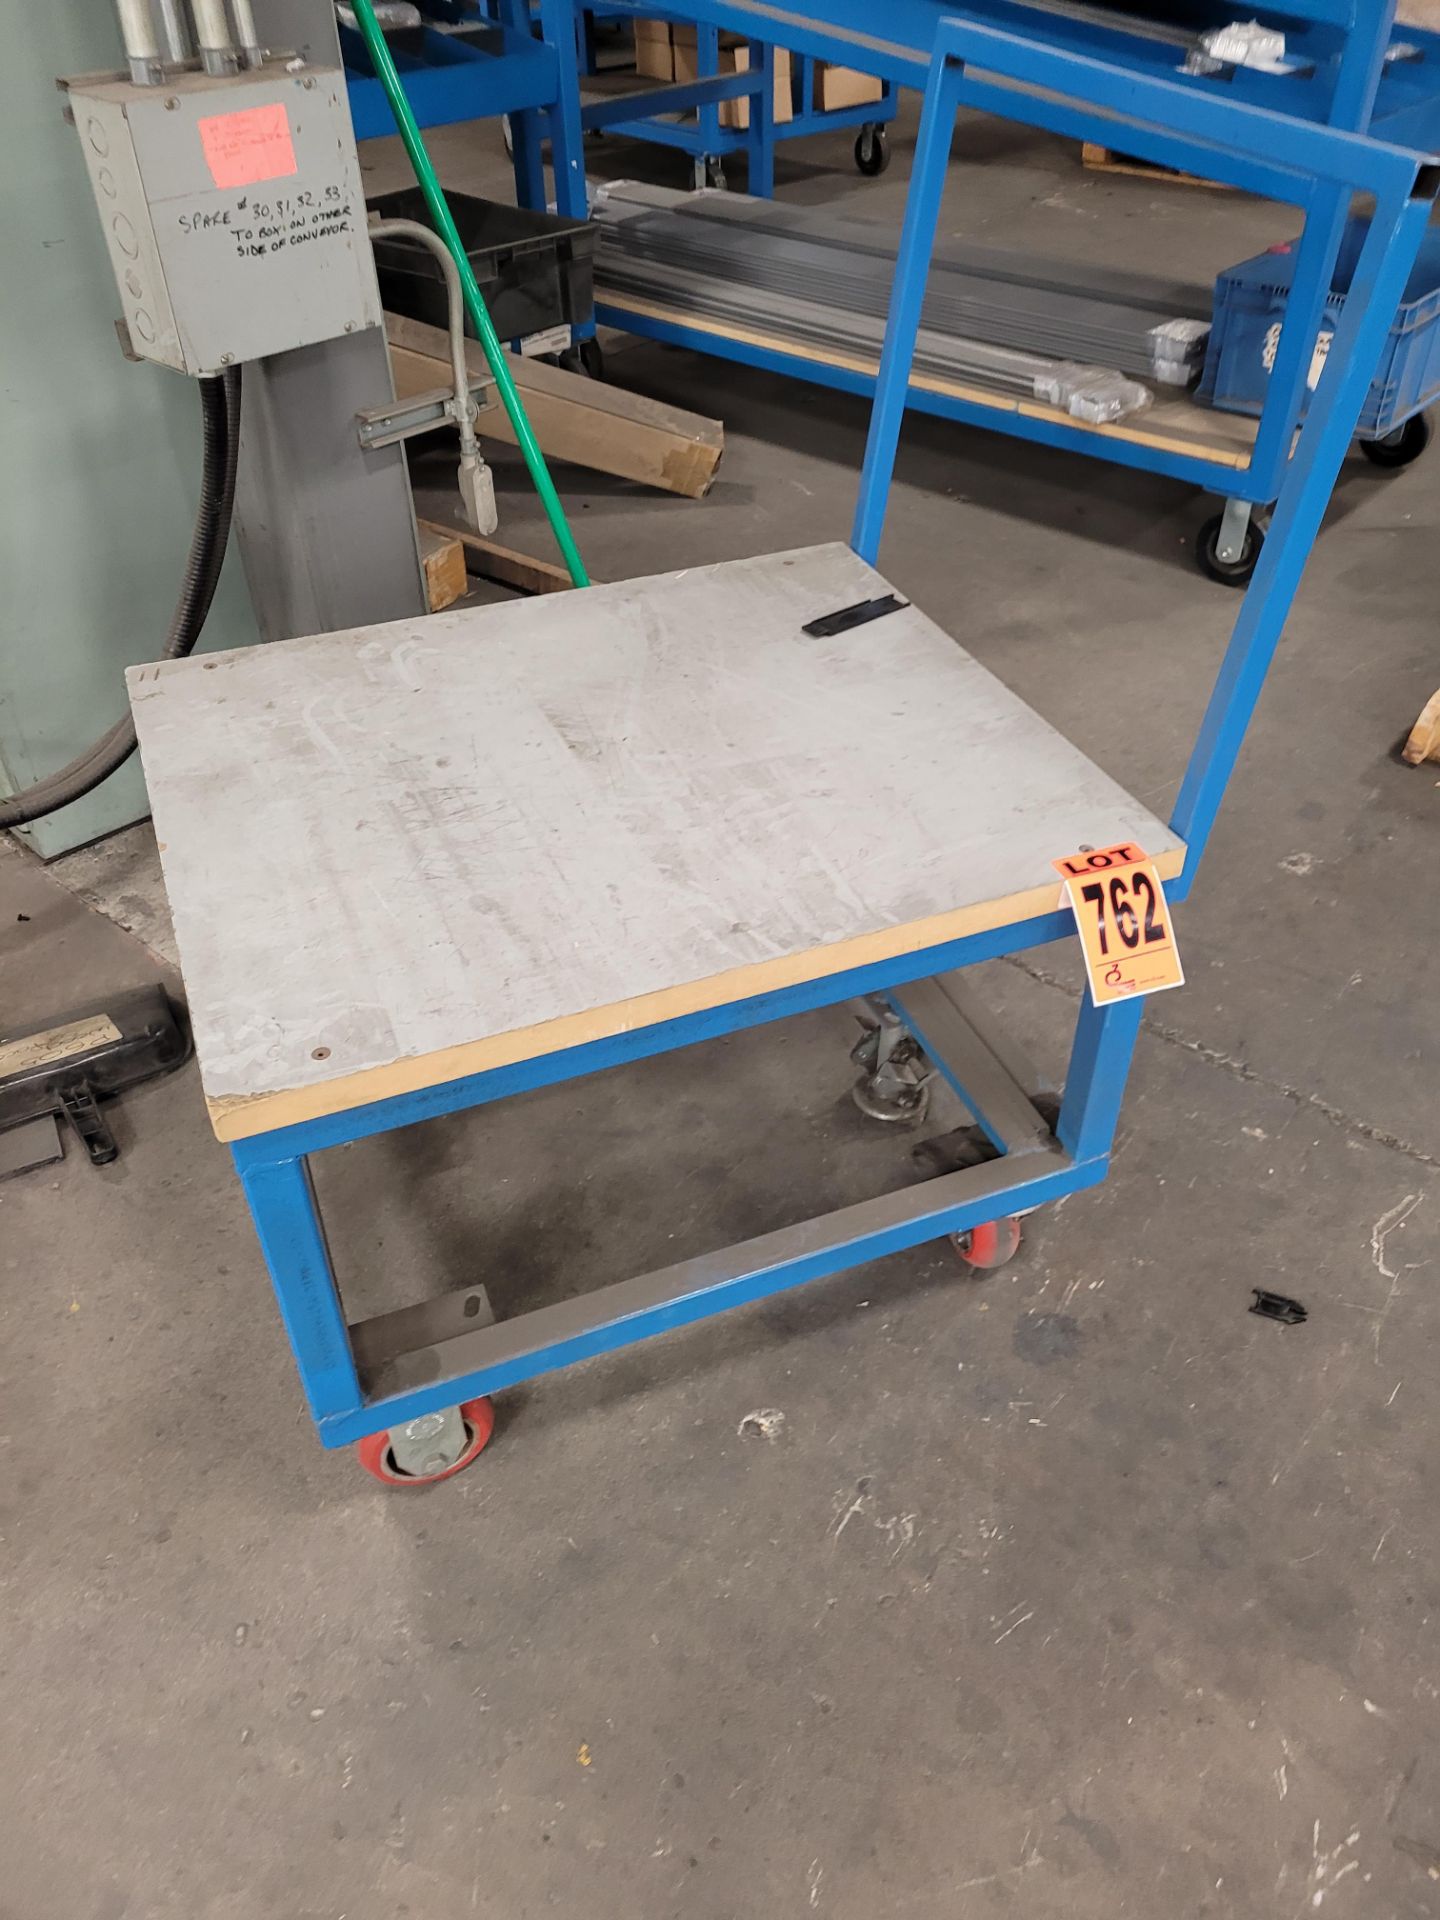 Steel frame platform cart w/ casters, floor lock, handle and plywood surface